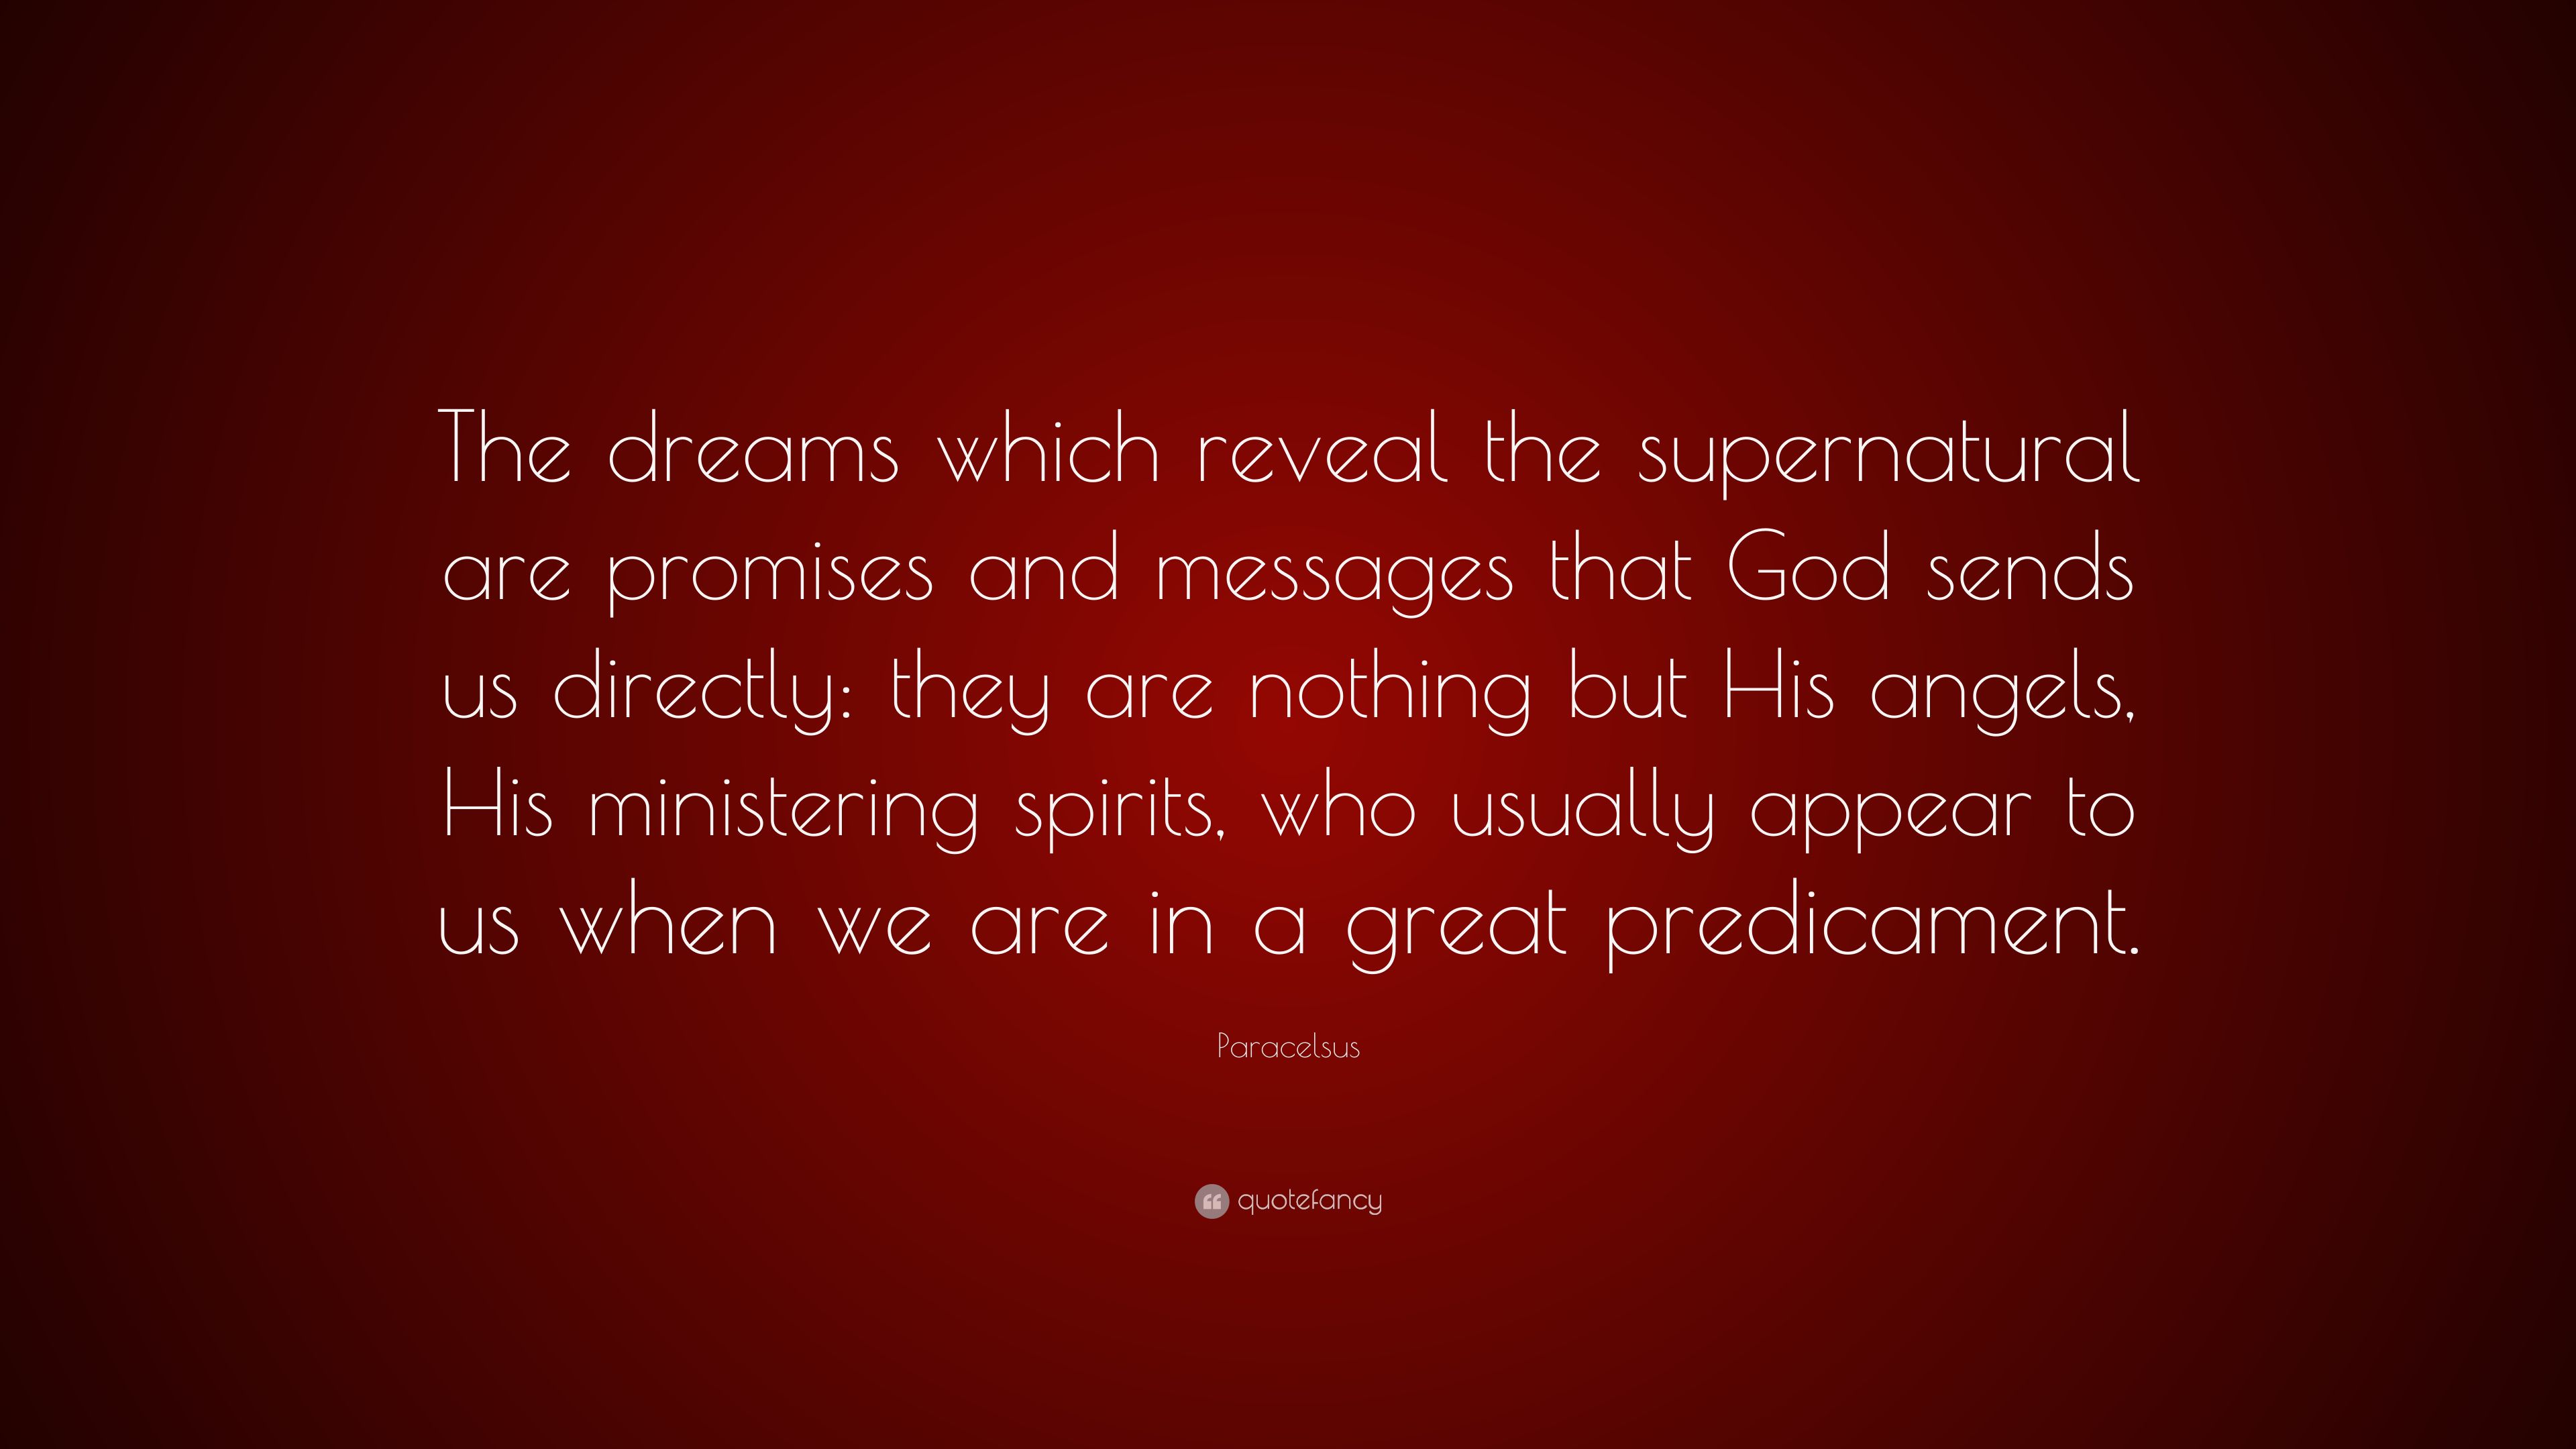 Paracelsus Quote: “The dreams which reveal the supernatural are